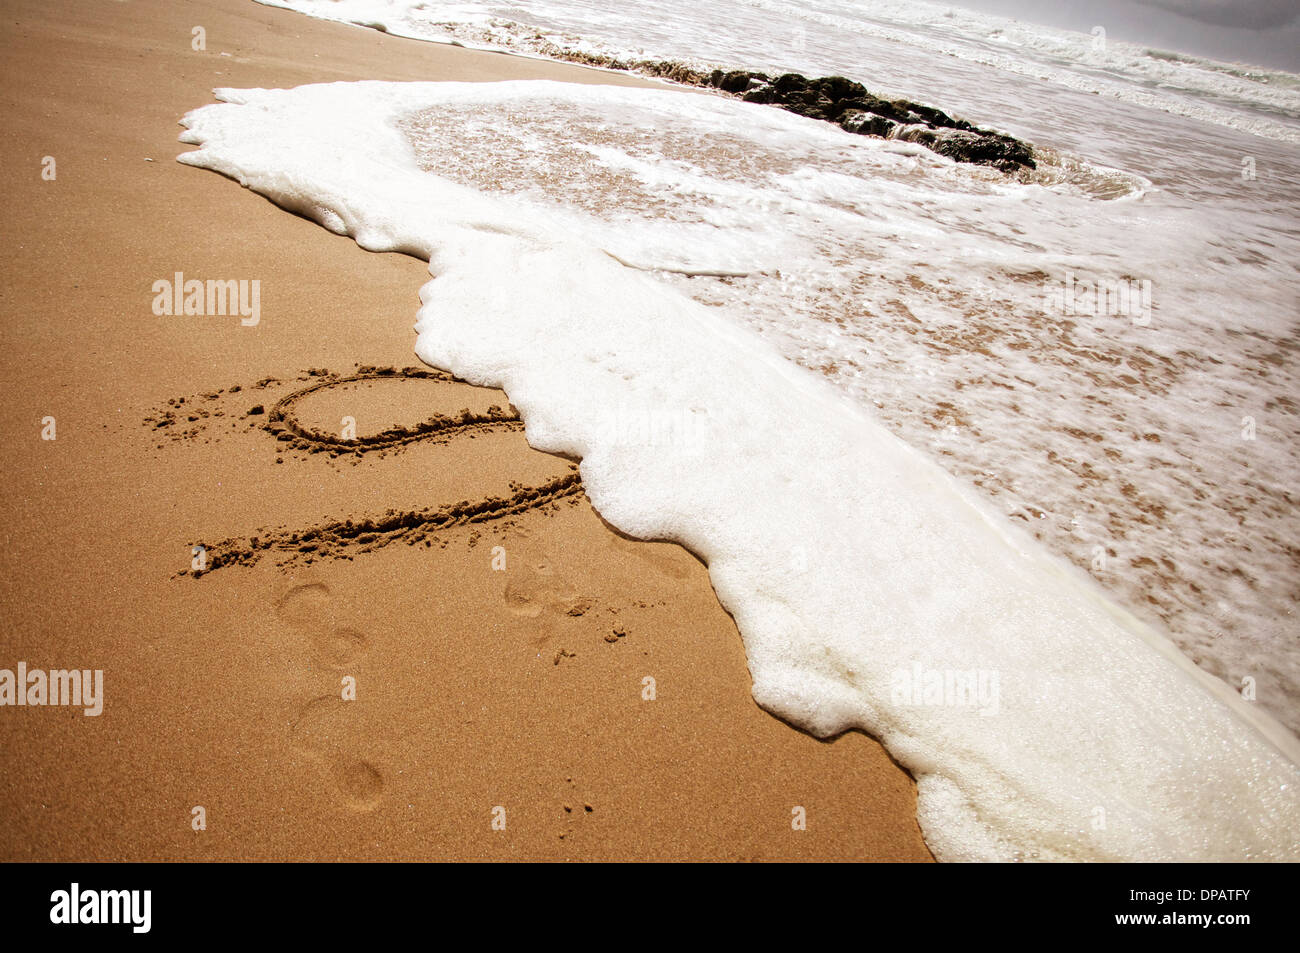 Holiday messages written into sand on a beach being washed away by the surf and waves coming ashore Stock Photo